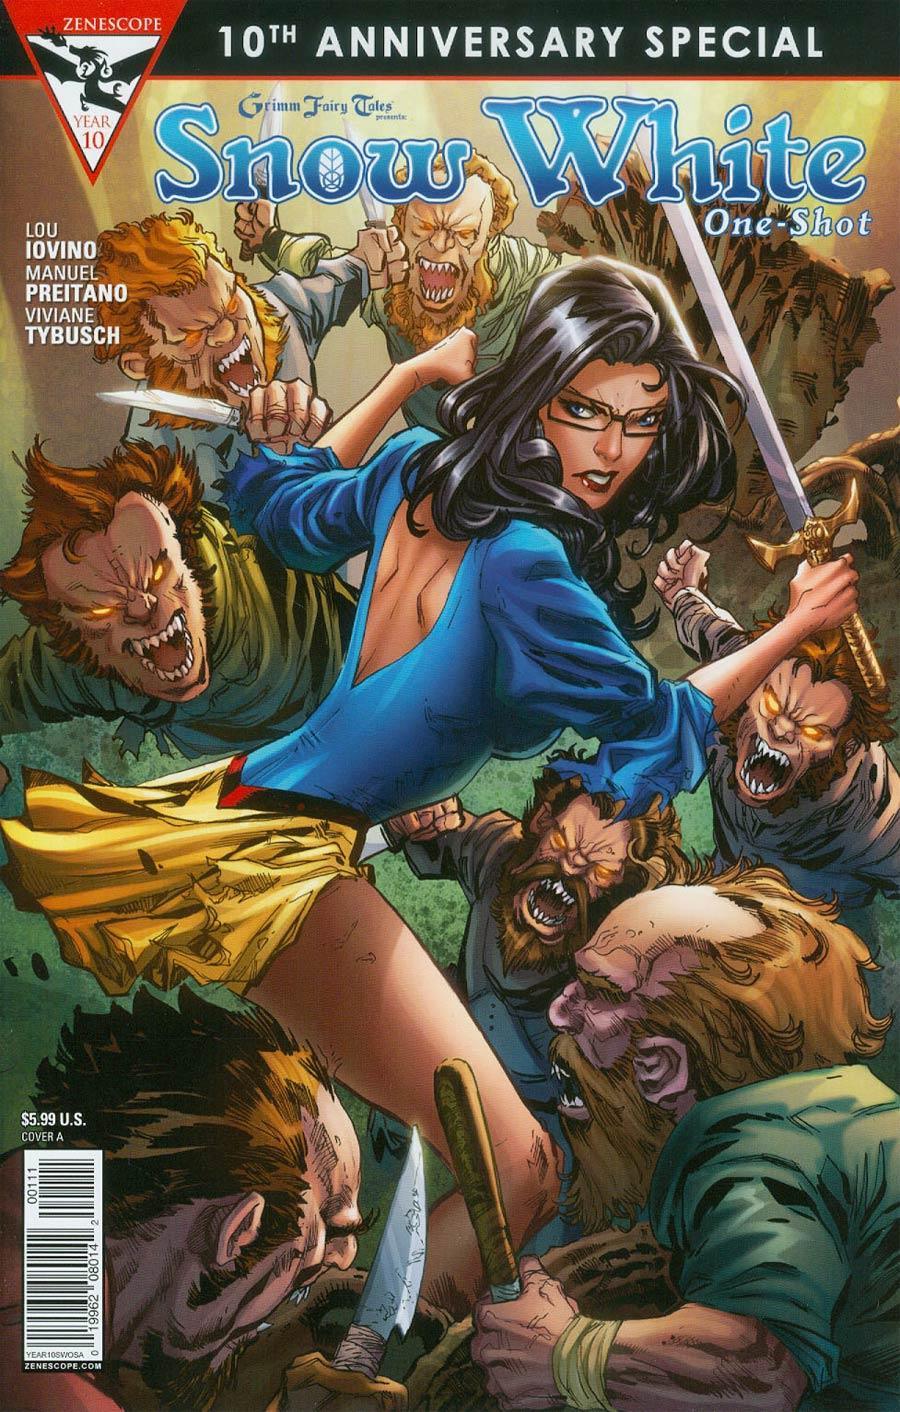 GFT 10TH ANNIVERSARY SPECIAL #1 SNOW WHITE - Kings Comics